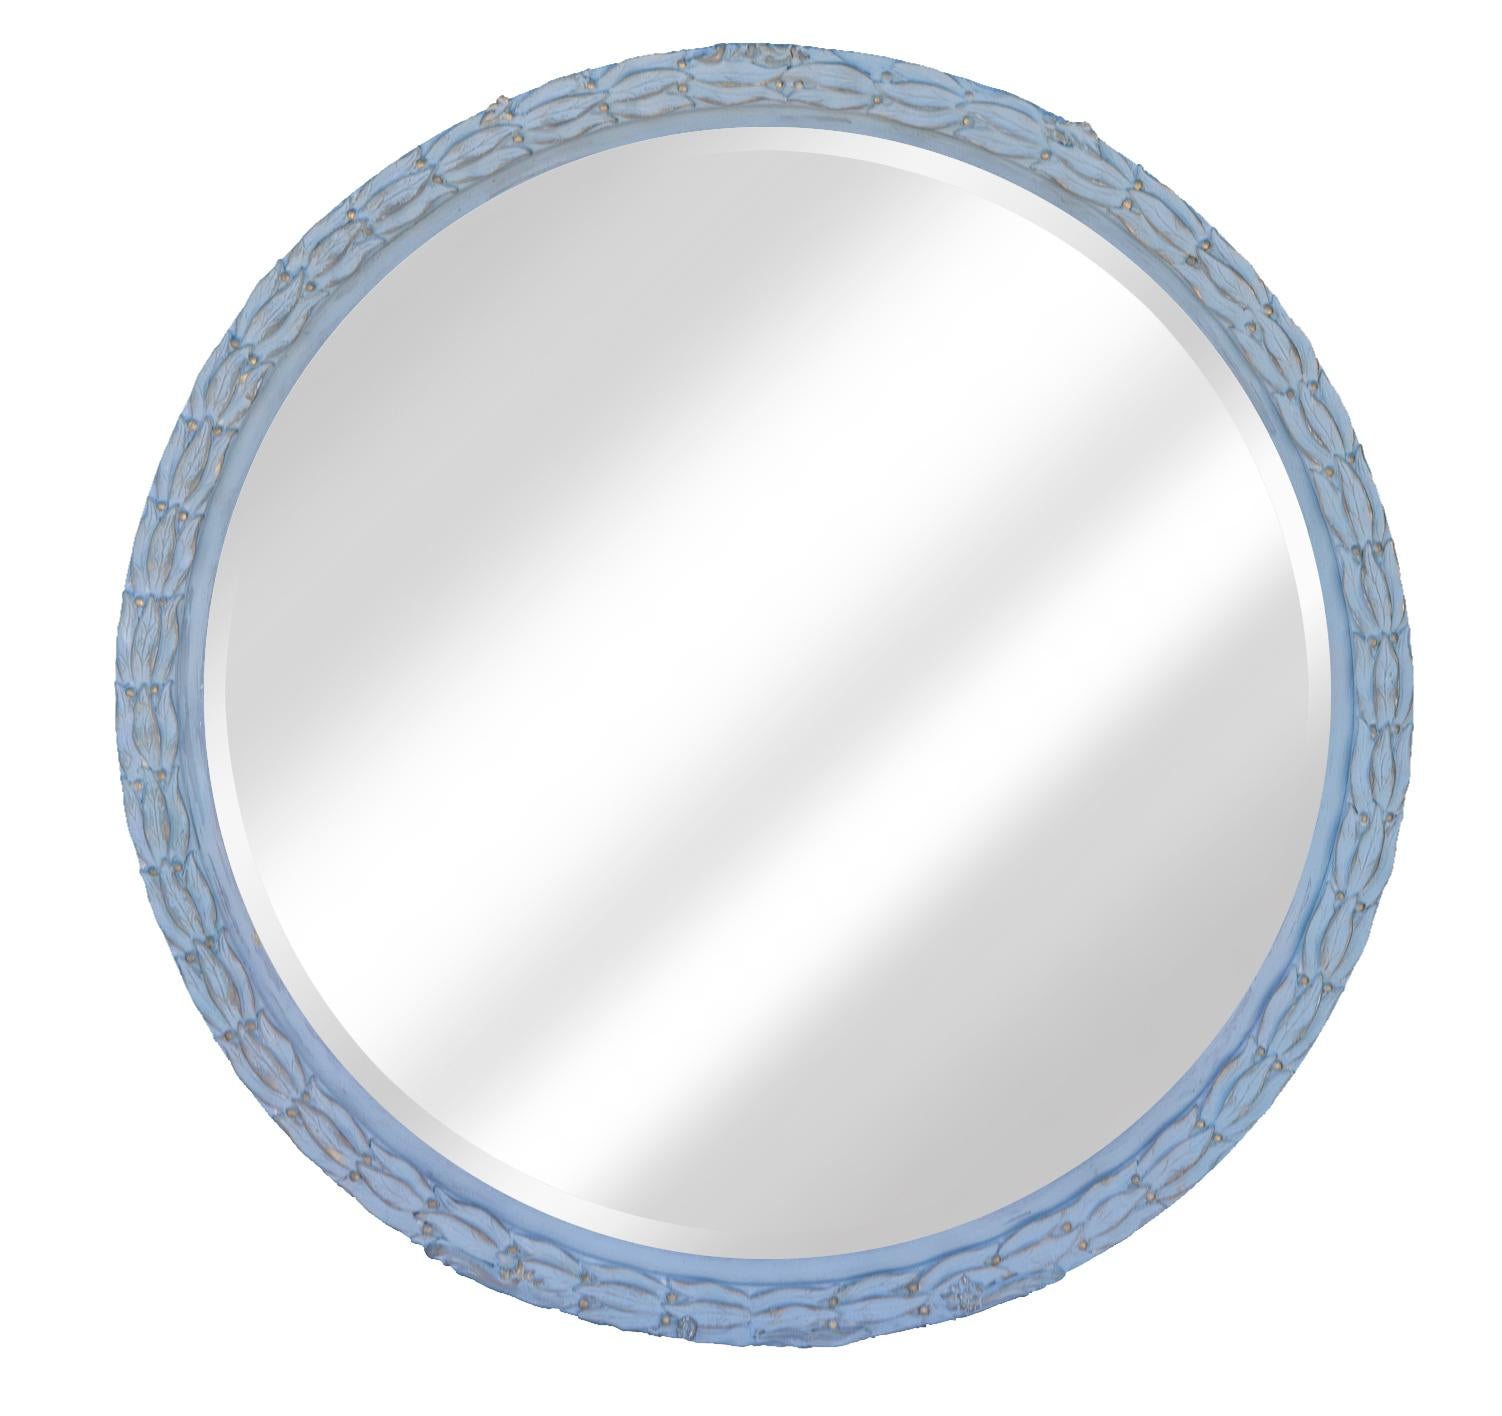 Restored Deco style round wood mirror with resin applique. Hand painted in French blue, accents of pale yellow gold.
The frame is finished in wax, the gold tones are peeking though.
Available for limited period, after which this will no longer be on